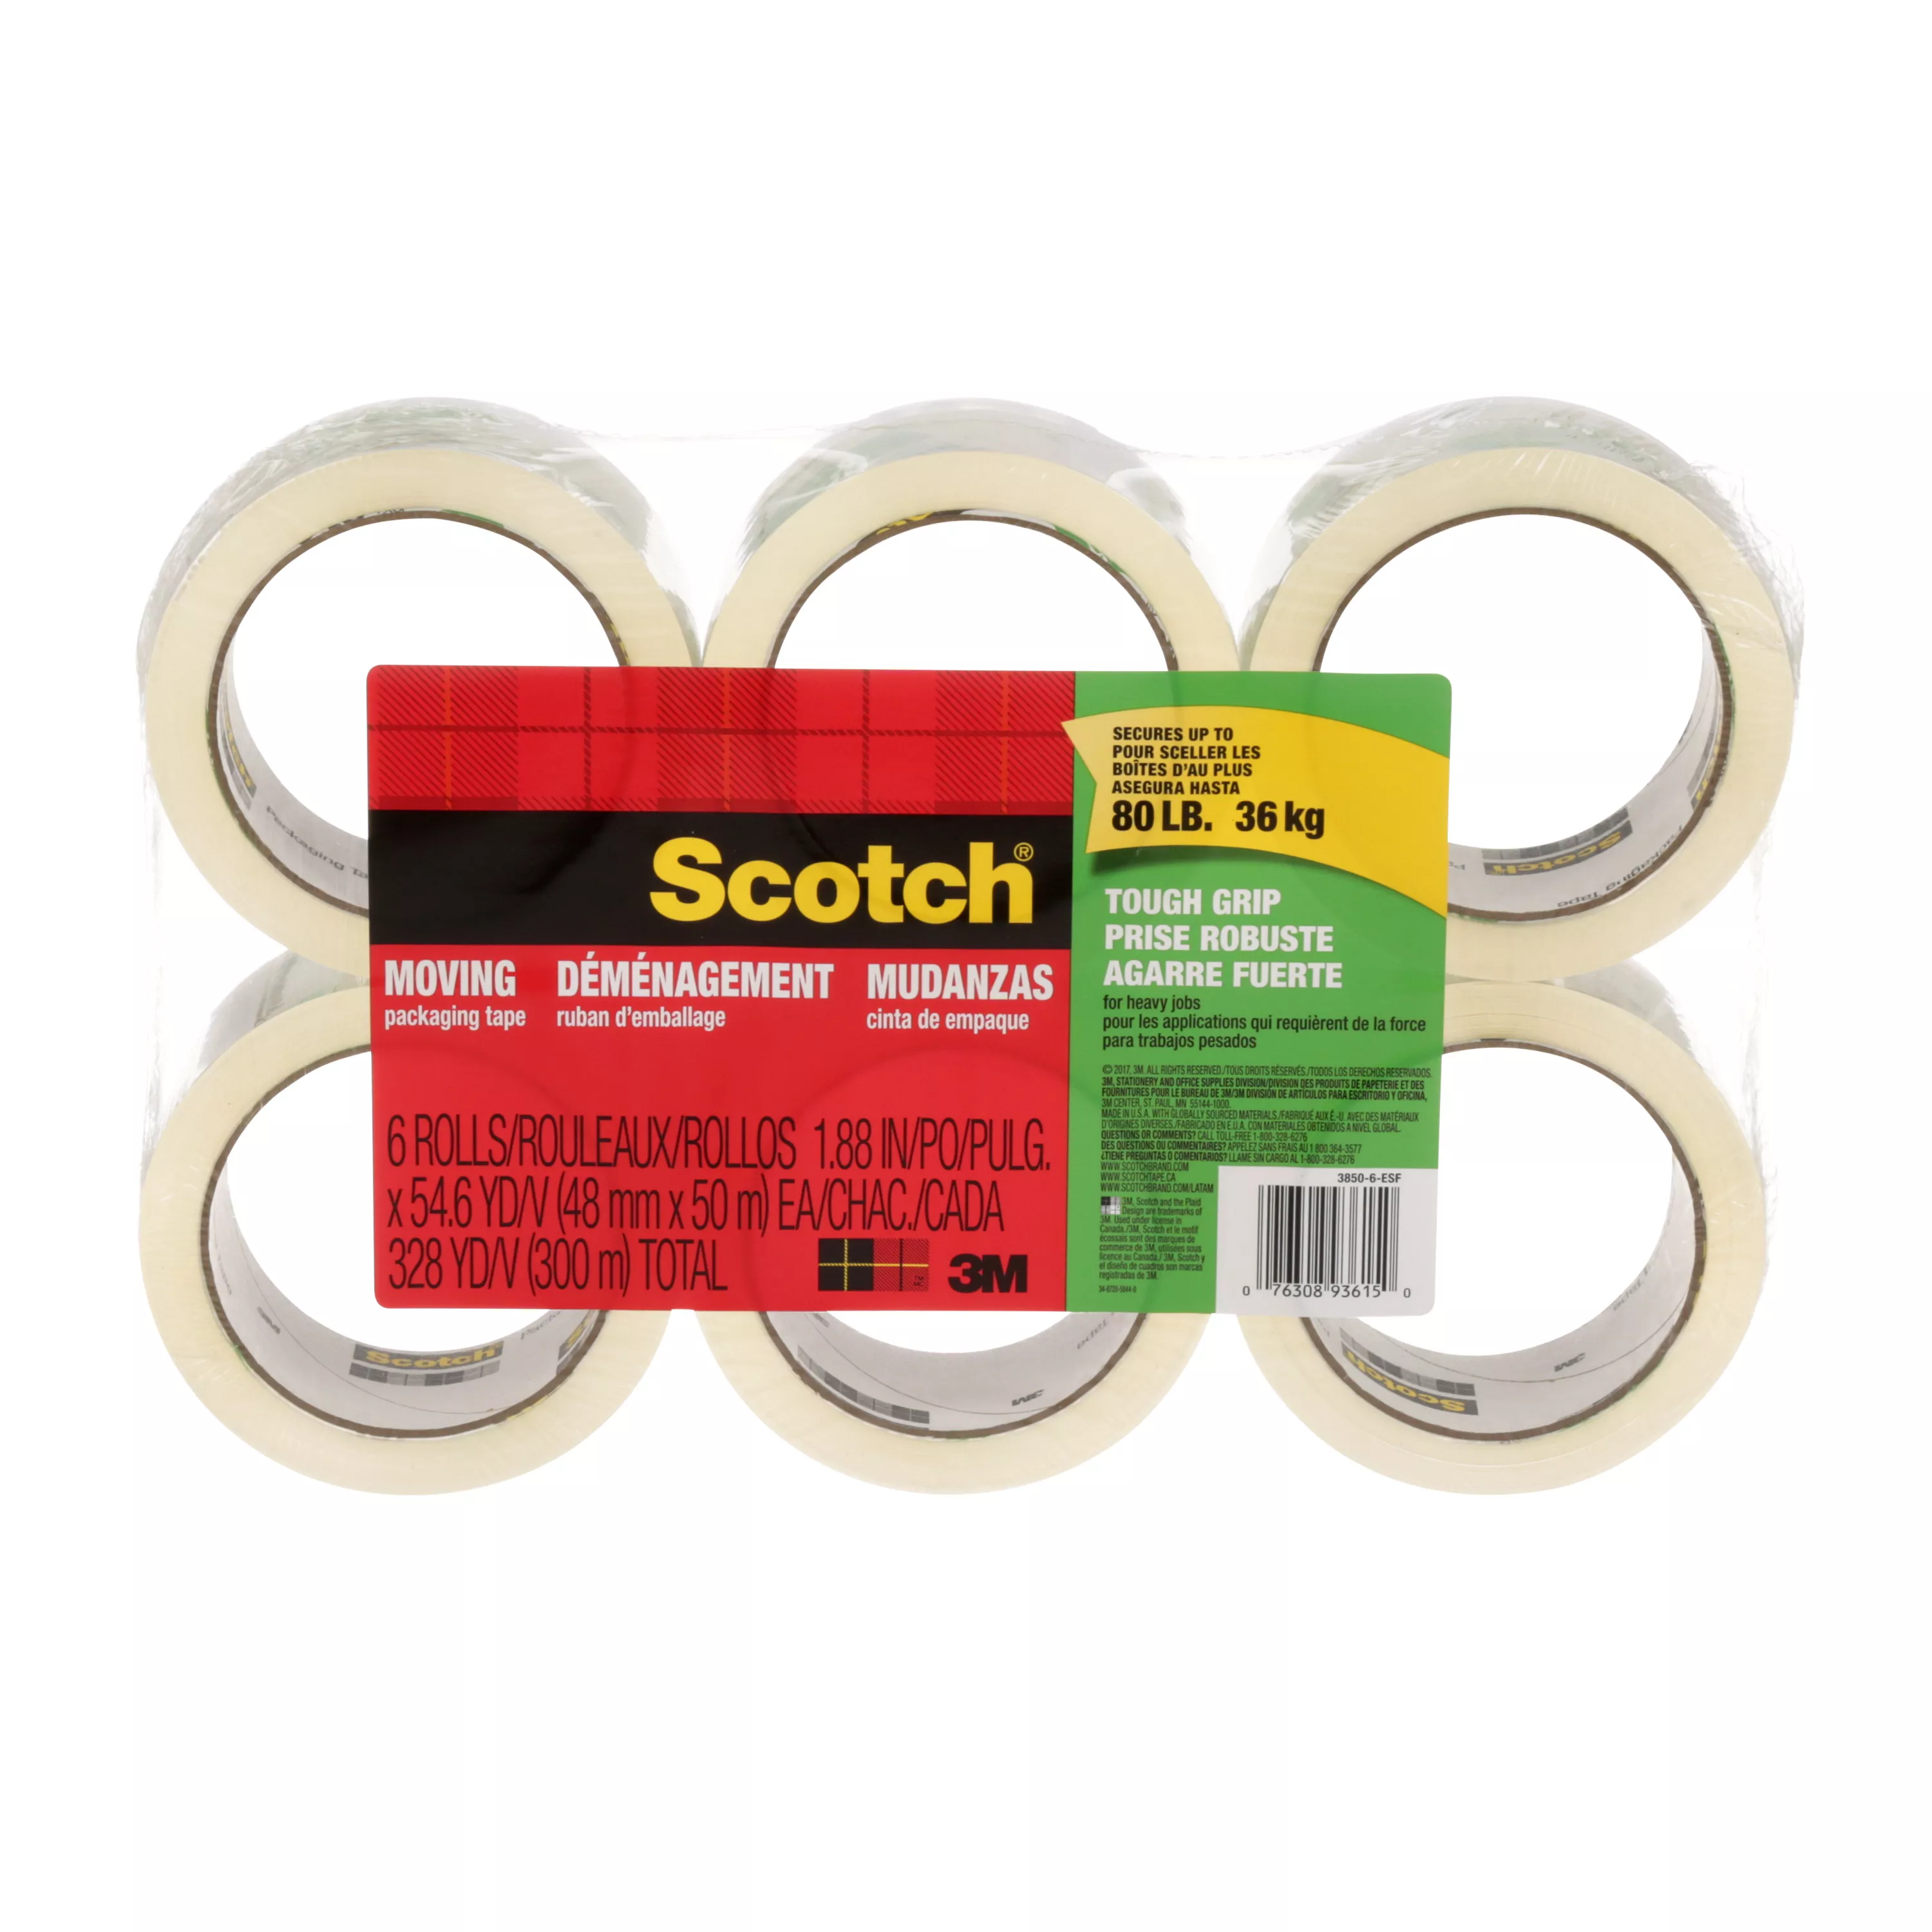 Scotch® Tough Grip Moving Packaging Tape, 3500-6-ESF, 1.88 in x 54.6 yd
(48 mm x 50 m), 6 Rolls/pack, 6 packs/case